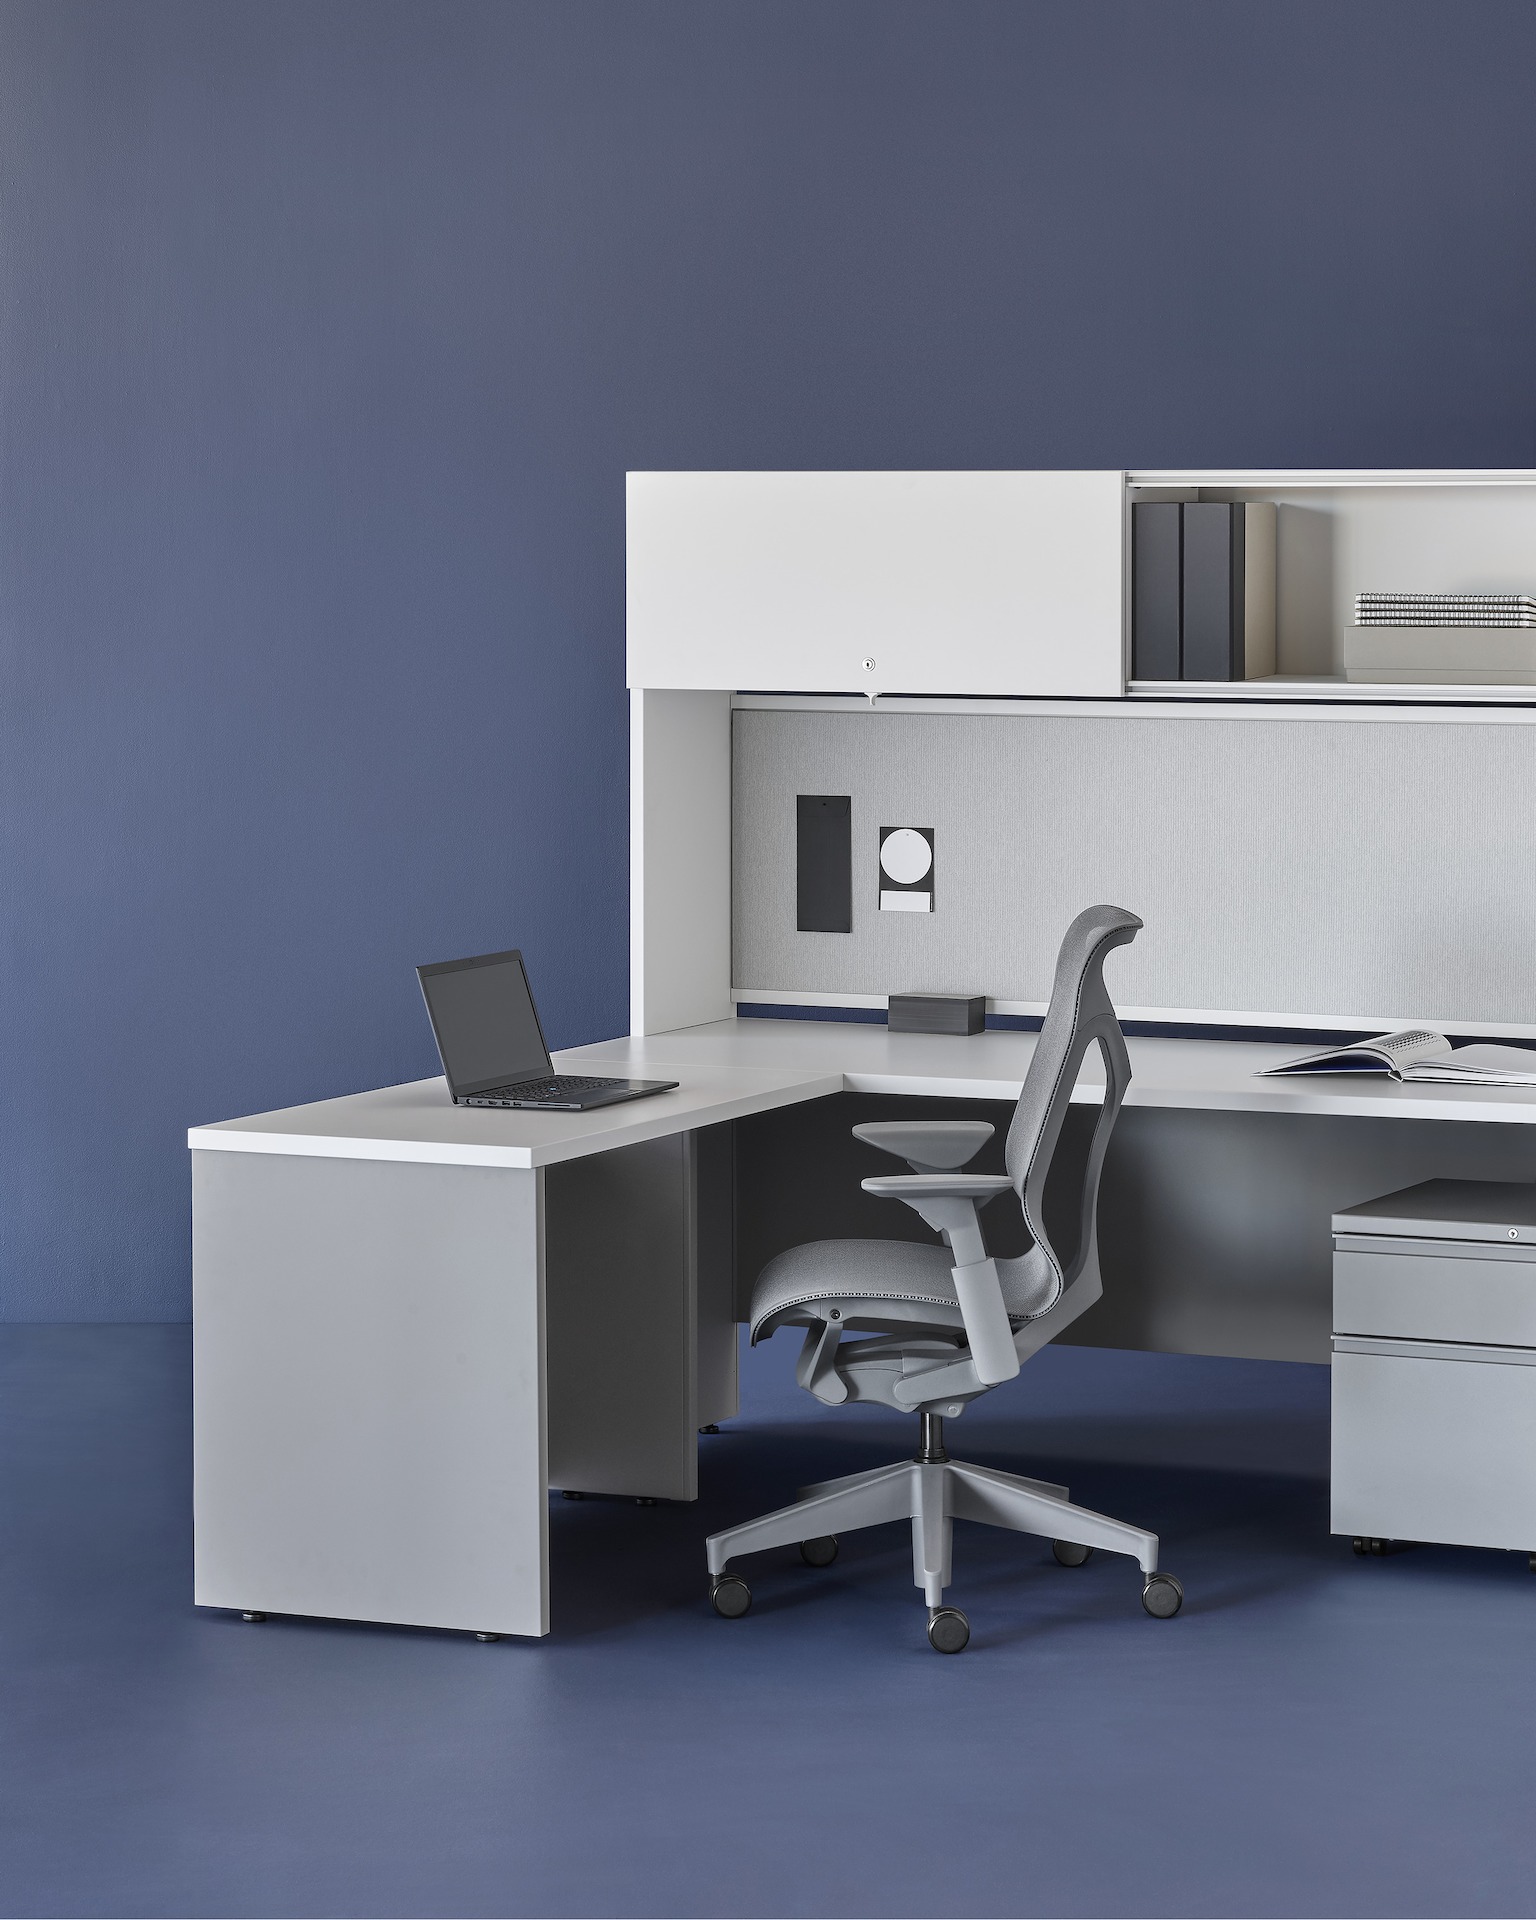 A grey and white Canvas Metal Desk workstation with upper storage, fabric back panel, and grey Cosm Chair.